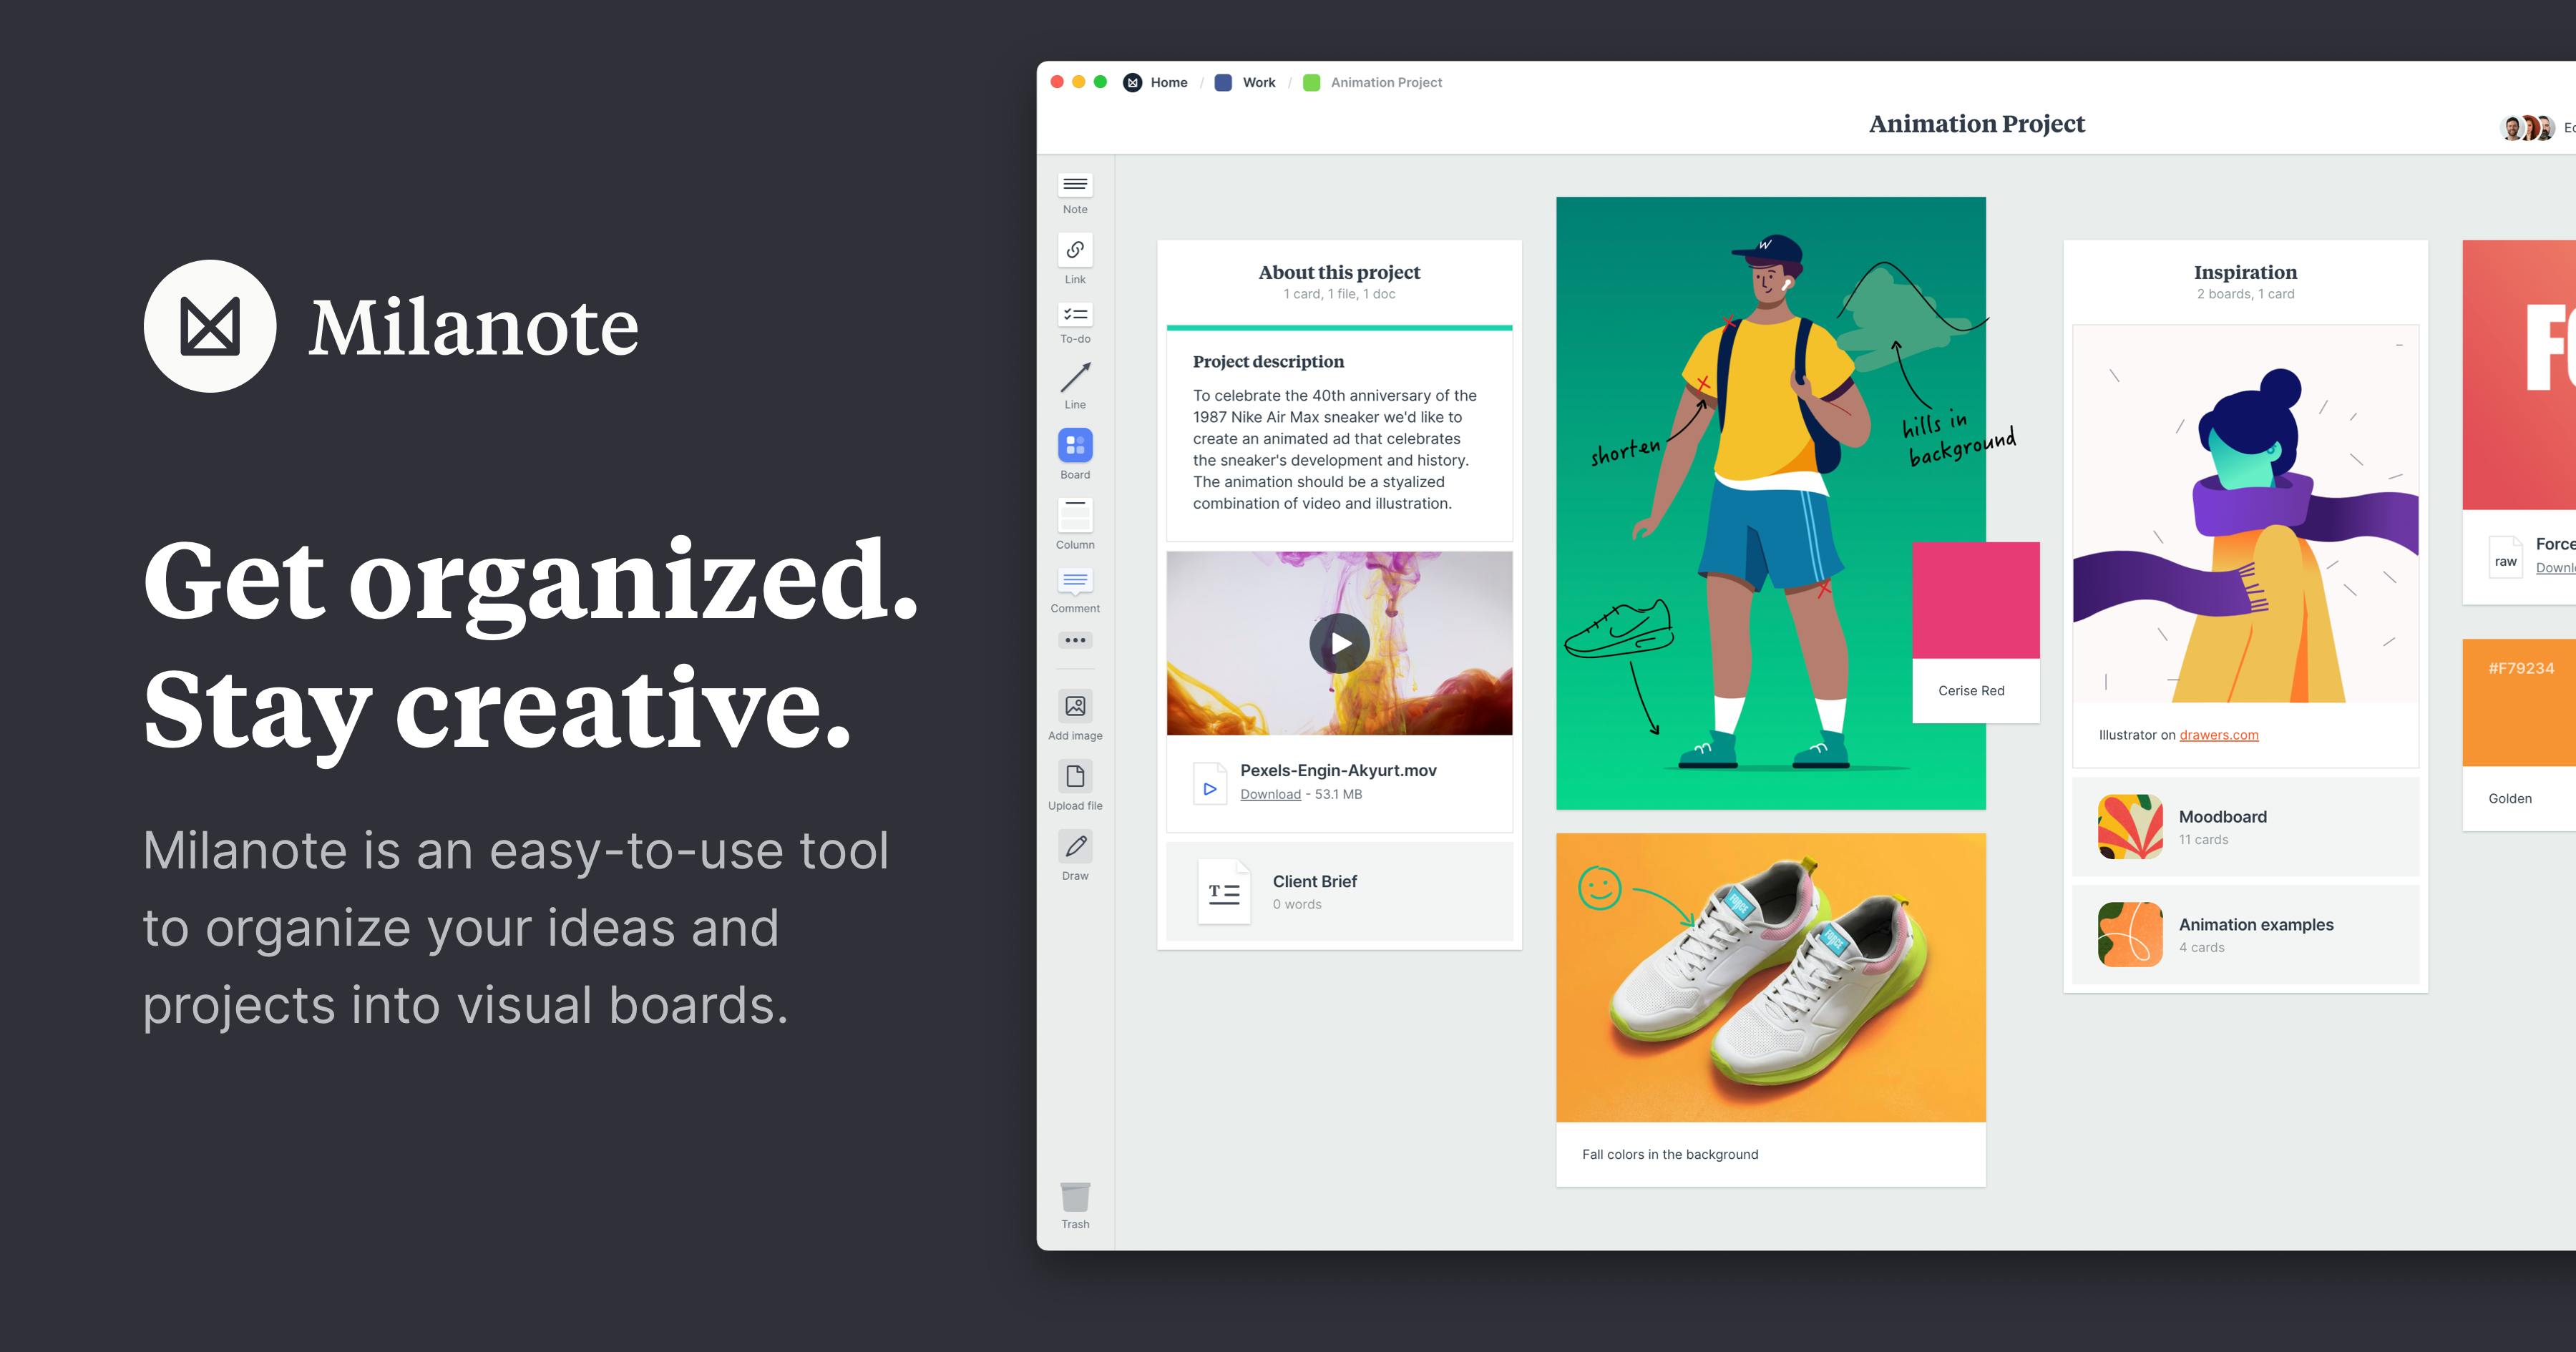 Milanote - The Tool For Organizing Creative Projects